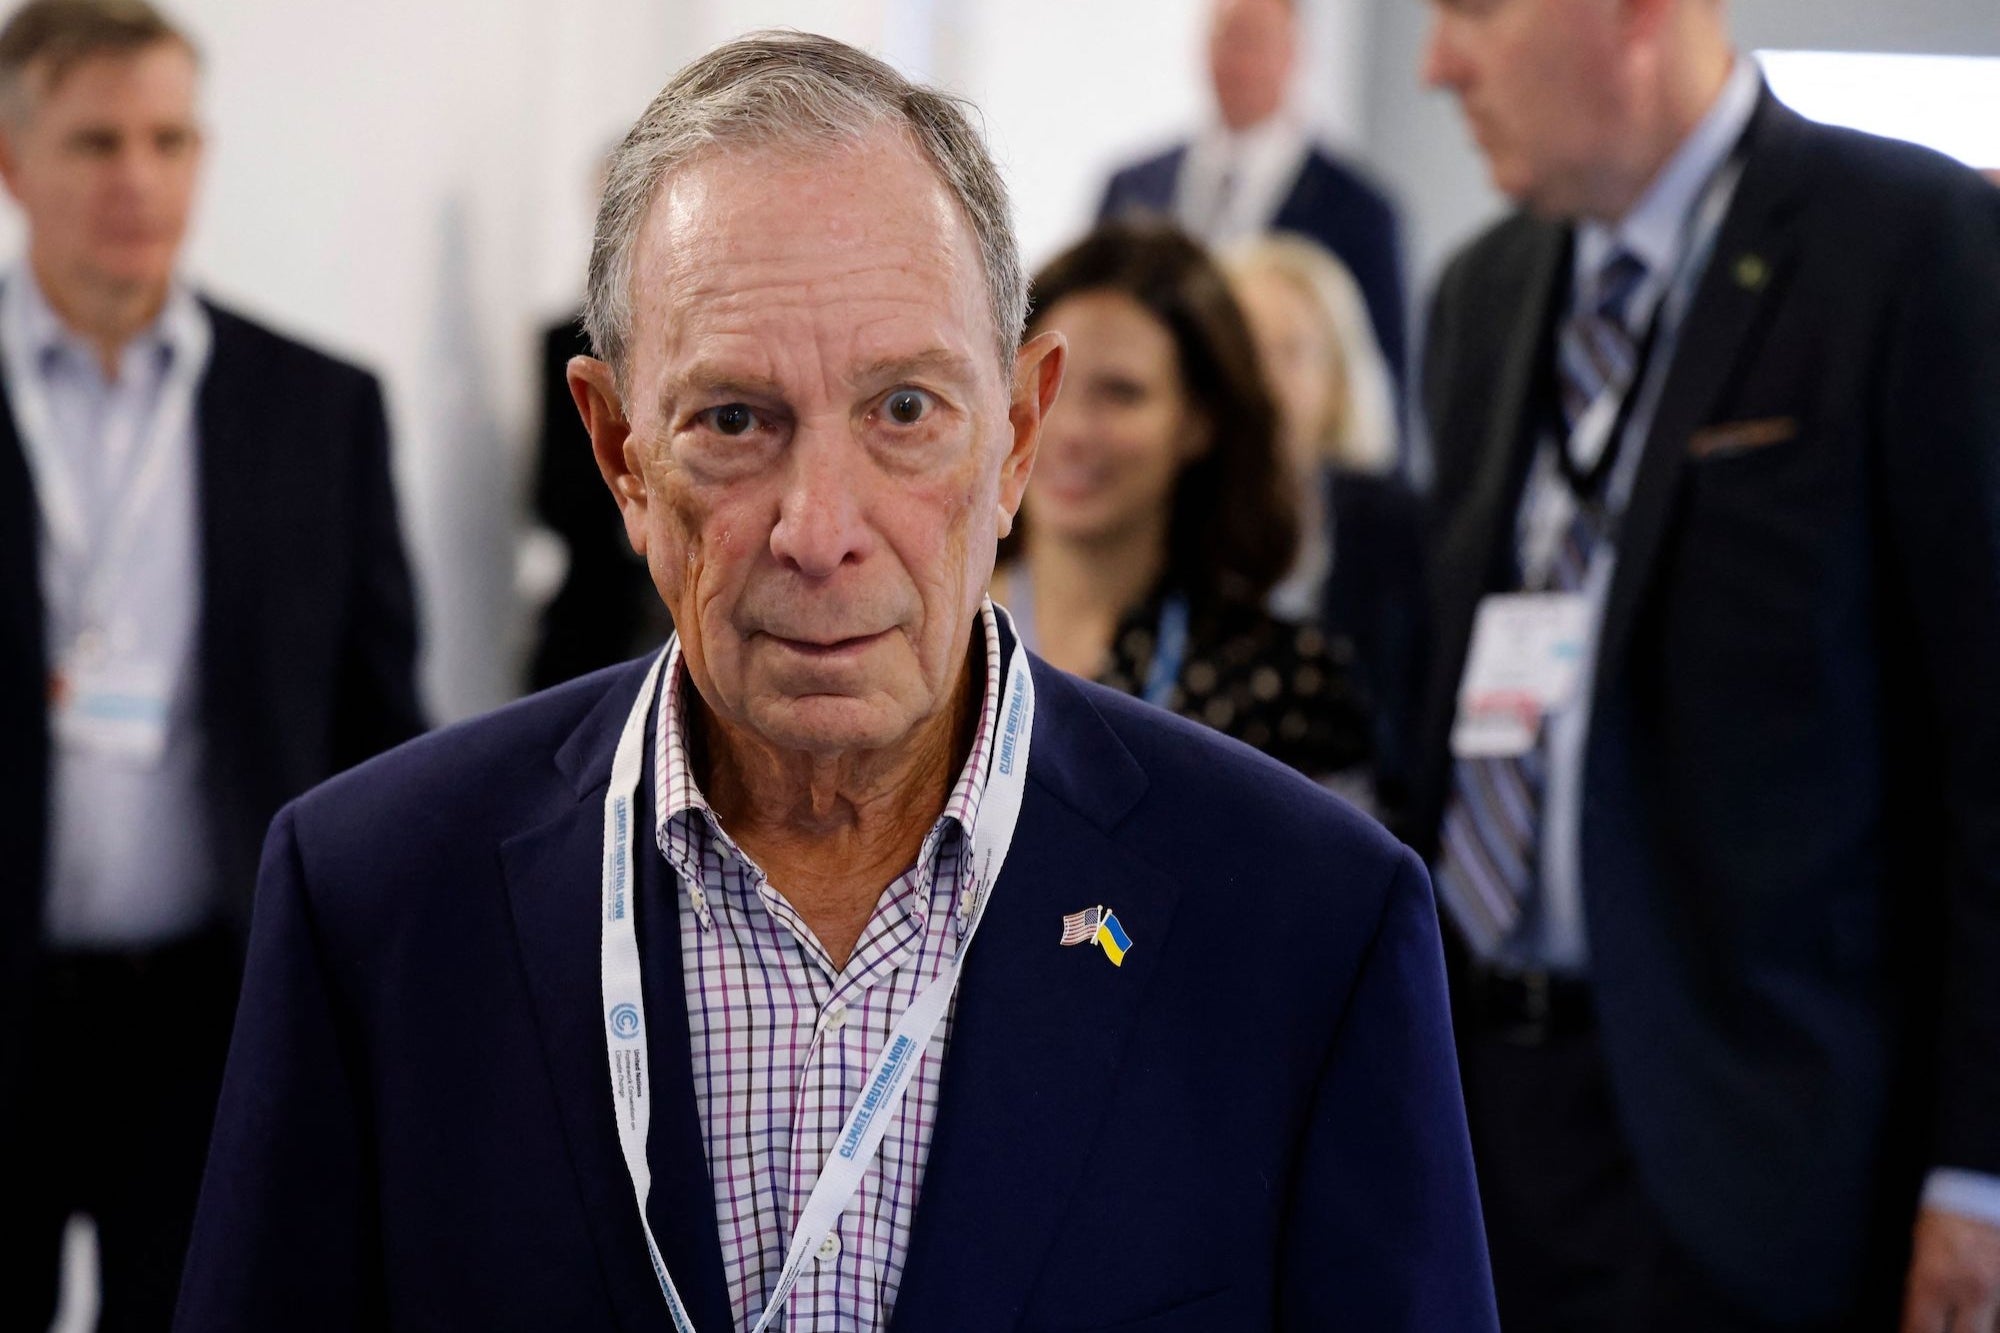 Michael Bloomberg Wants to Wean the World from Coal by 2040